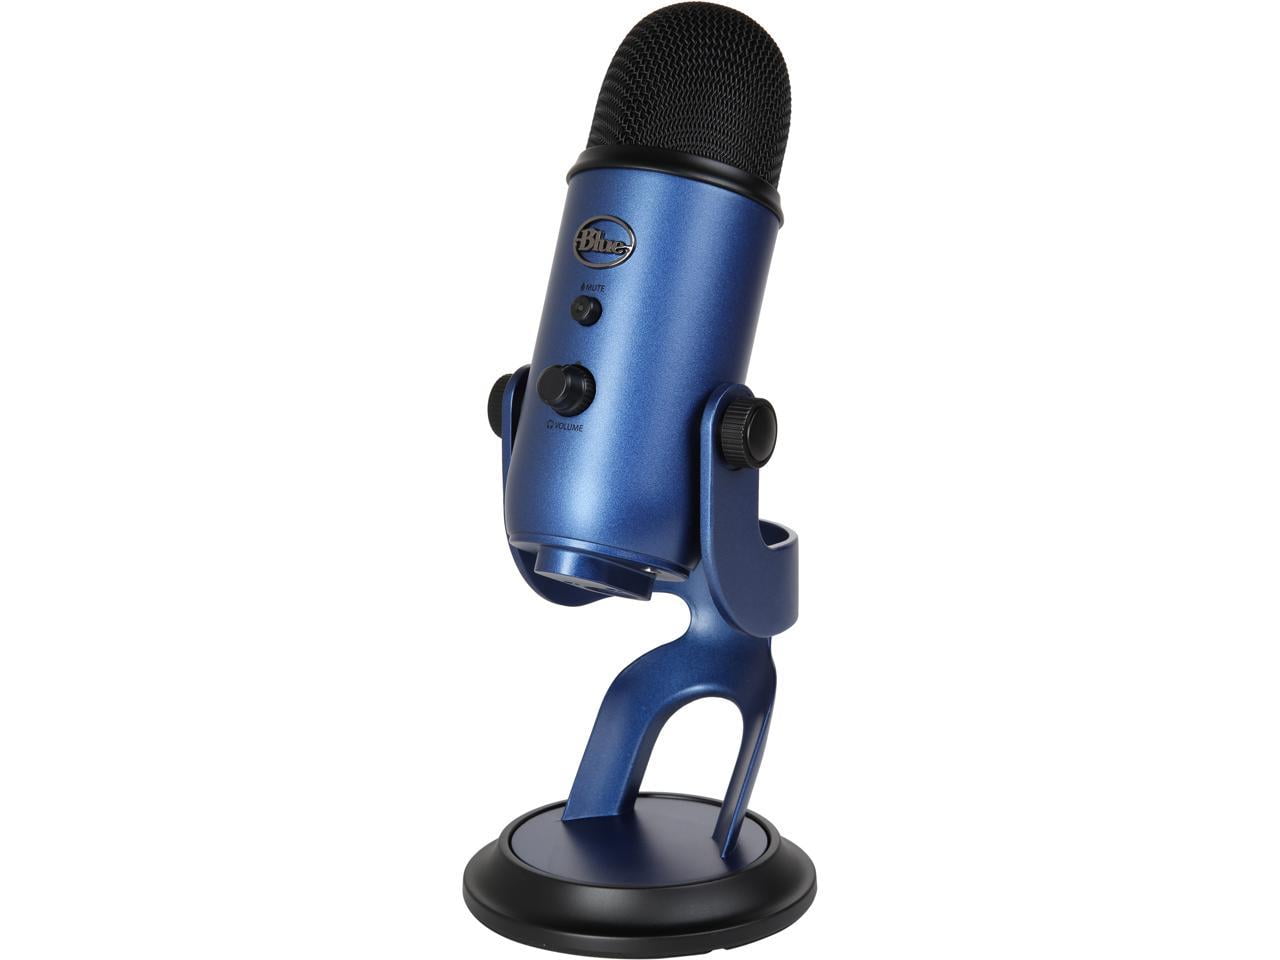 dråbe binde Messing Blue Yeti USB Microphone for PC, Mac, Gaming, Recording, Streaming,  Podcasting, Studio and Computer Condenser Mic with Blue VO!CE effects, 4  Pickup Patterns, Plug and Play – Midnight Blue - Walmart.com